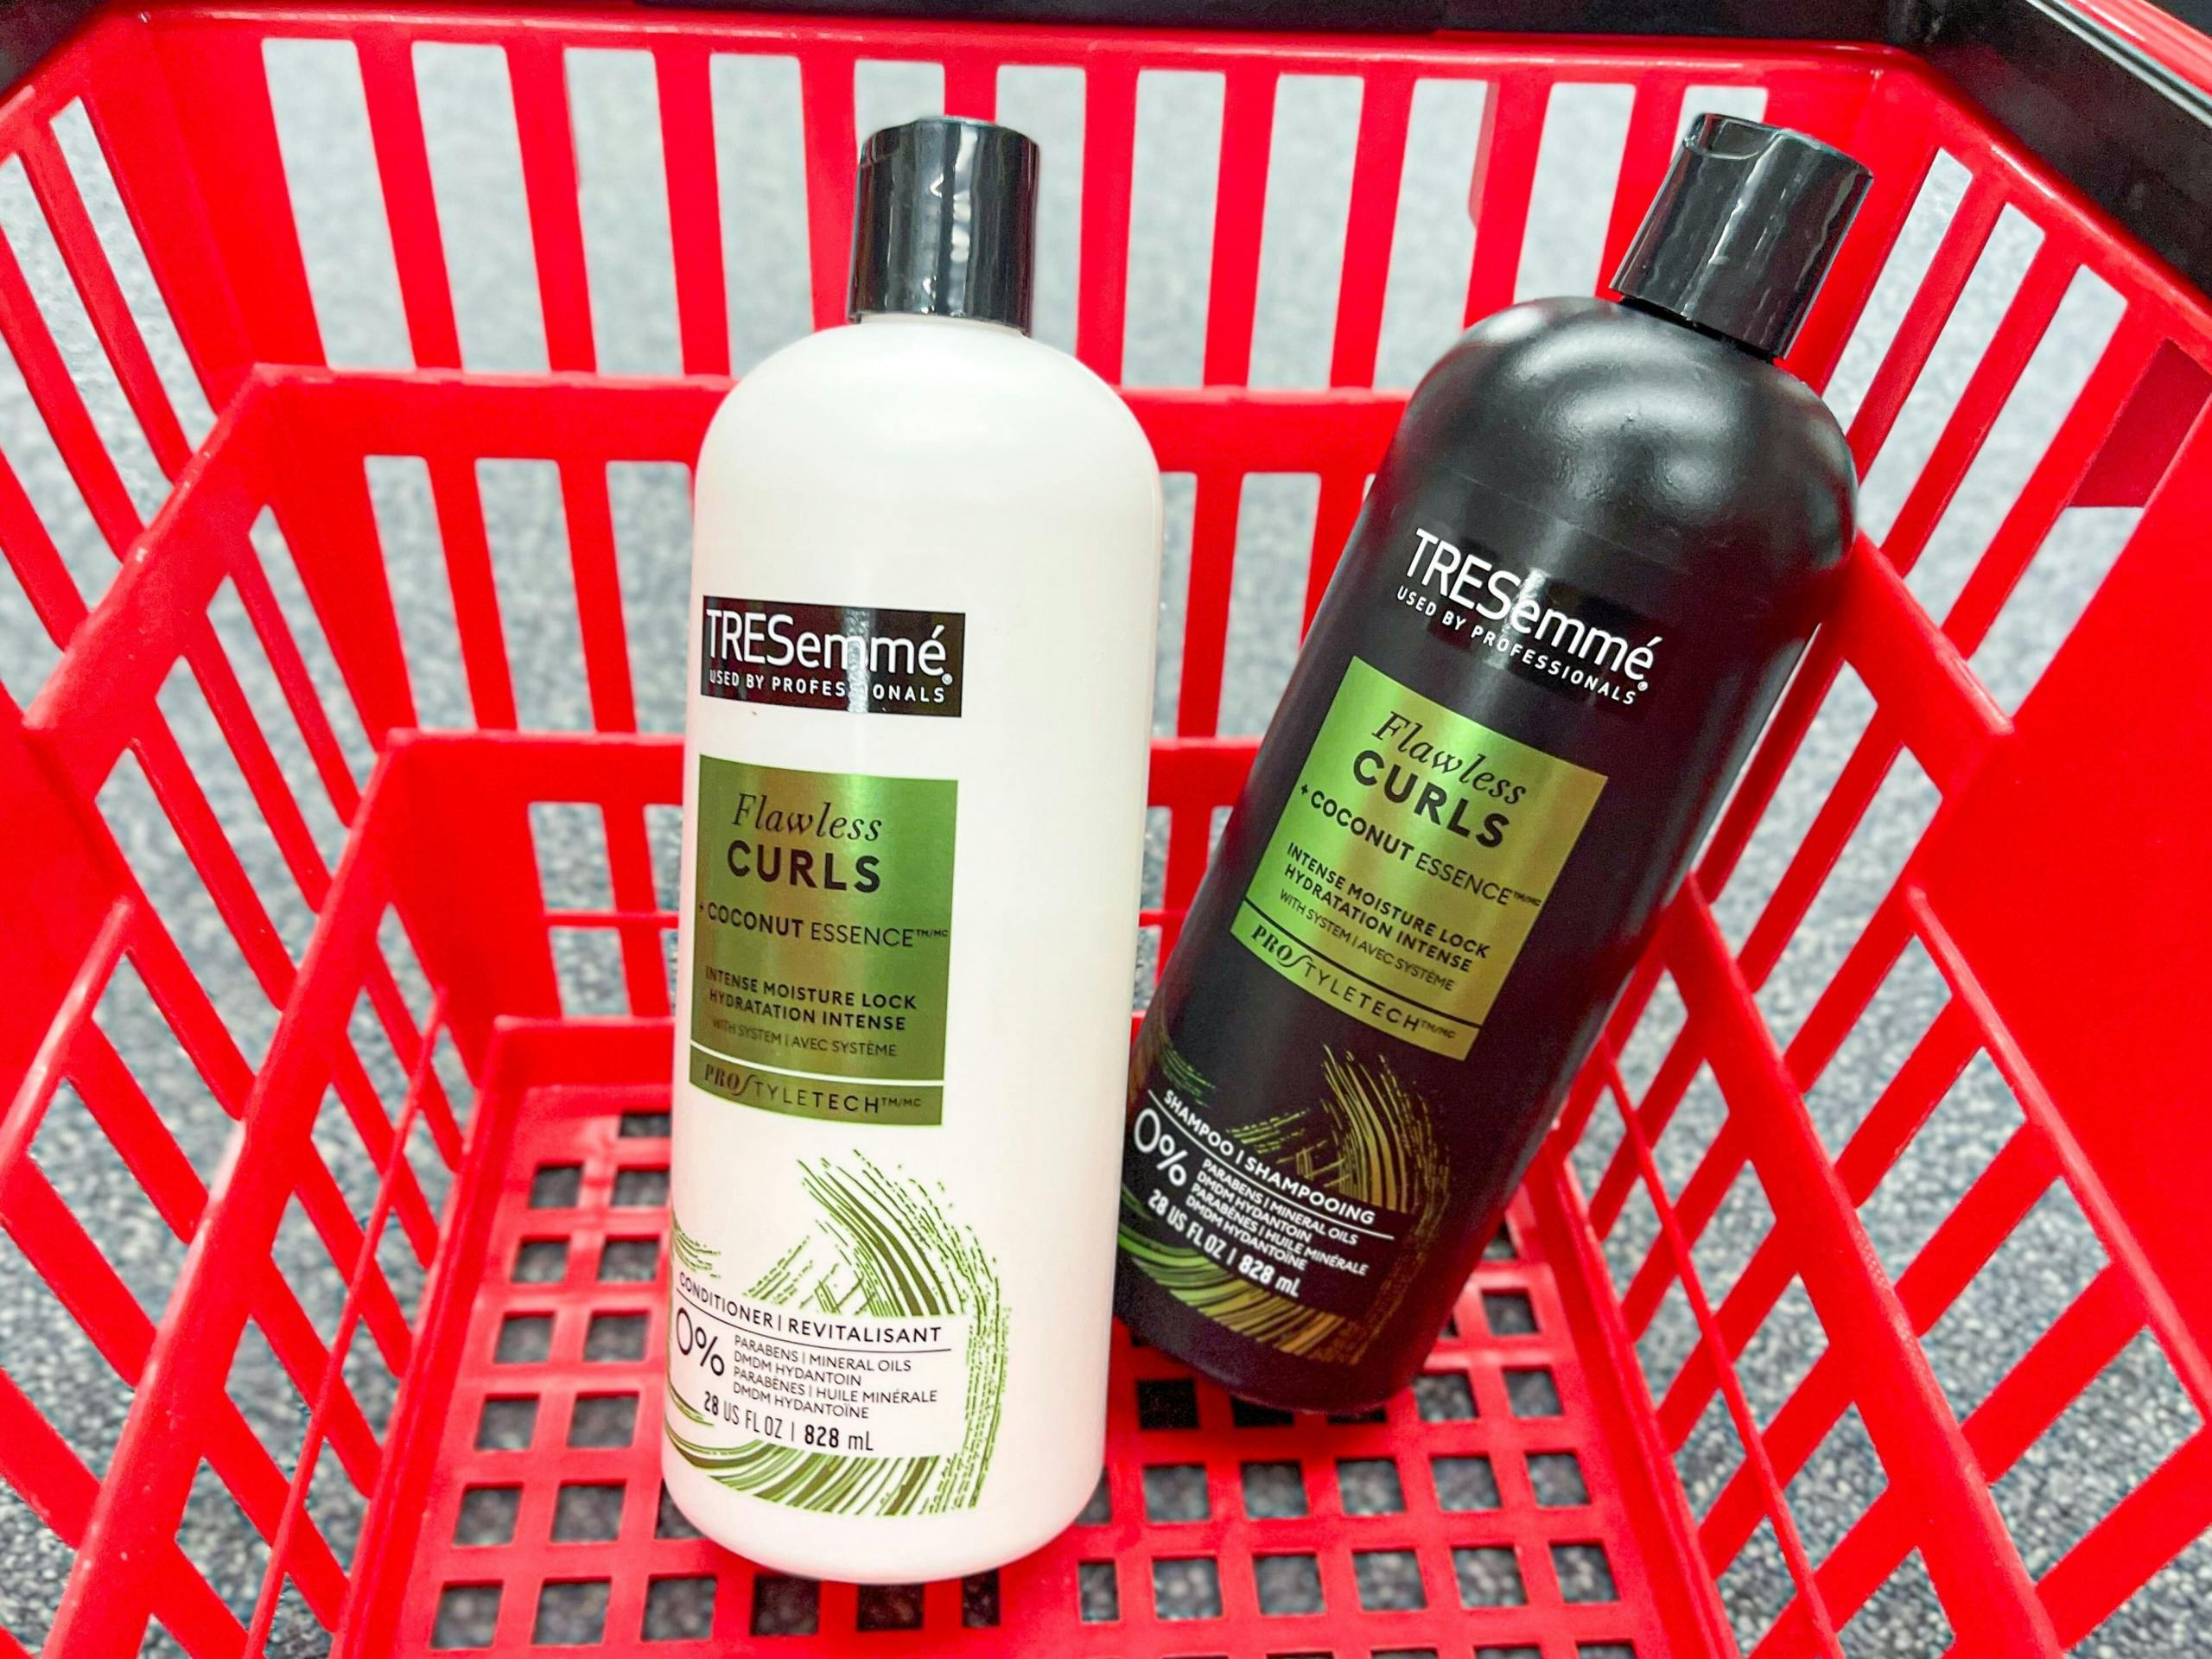 two bottles of Tresemme Flawless Curls shampoo and conditioner inside shopping basket